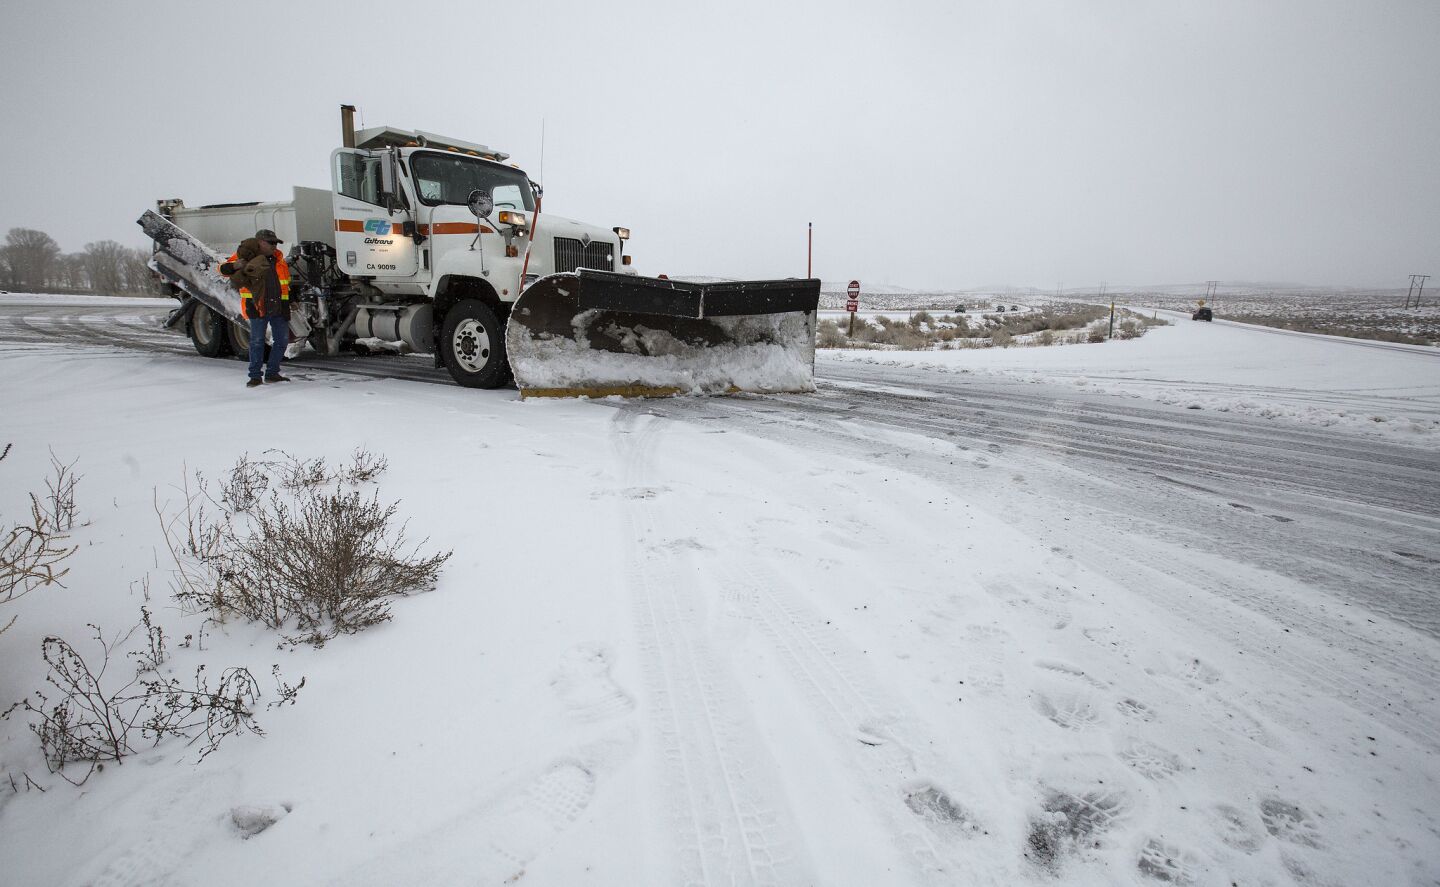 Caltrans snowplow operator Mike Morgan prepares to turn his plow around after making loops on the 395 between Bishop and Tom's Place, a route he drives 12 hours a day clearing heavy snow in the Eastern Sierra.